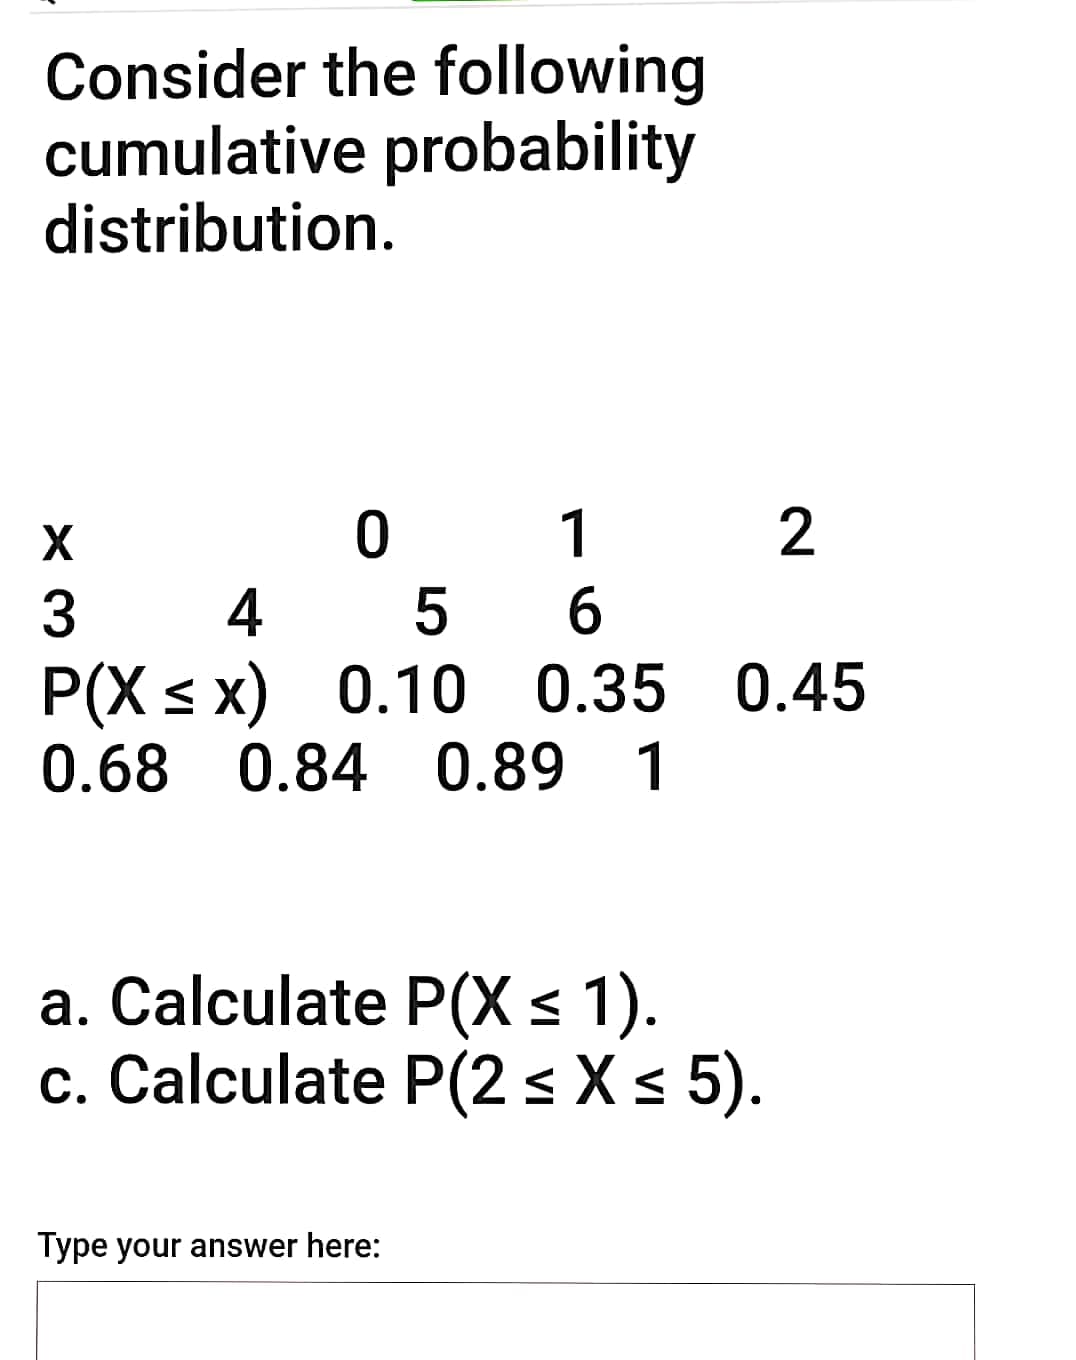 Consider the following
cumulative probability
distribution.
0 1
5
P(X s x) 0.10 0.35 0.45
0.68 0.84 0.89
2
3
6
1
a. Calculate P(X < 1).
c. Calculate P(2 s X s 5).
Type your answer here:
